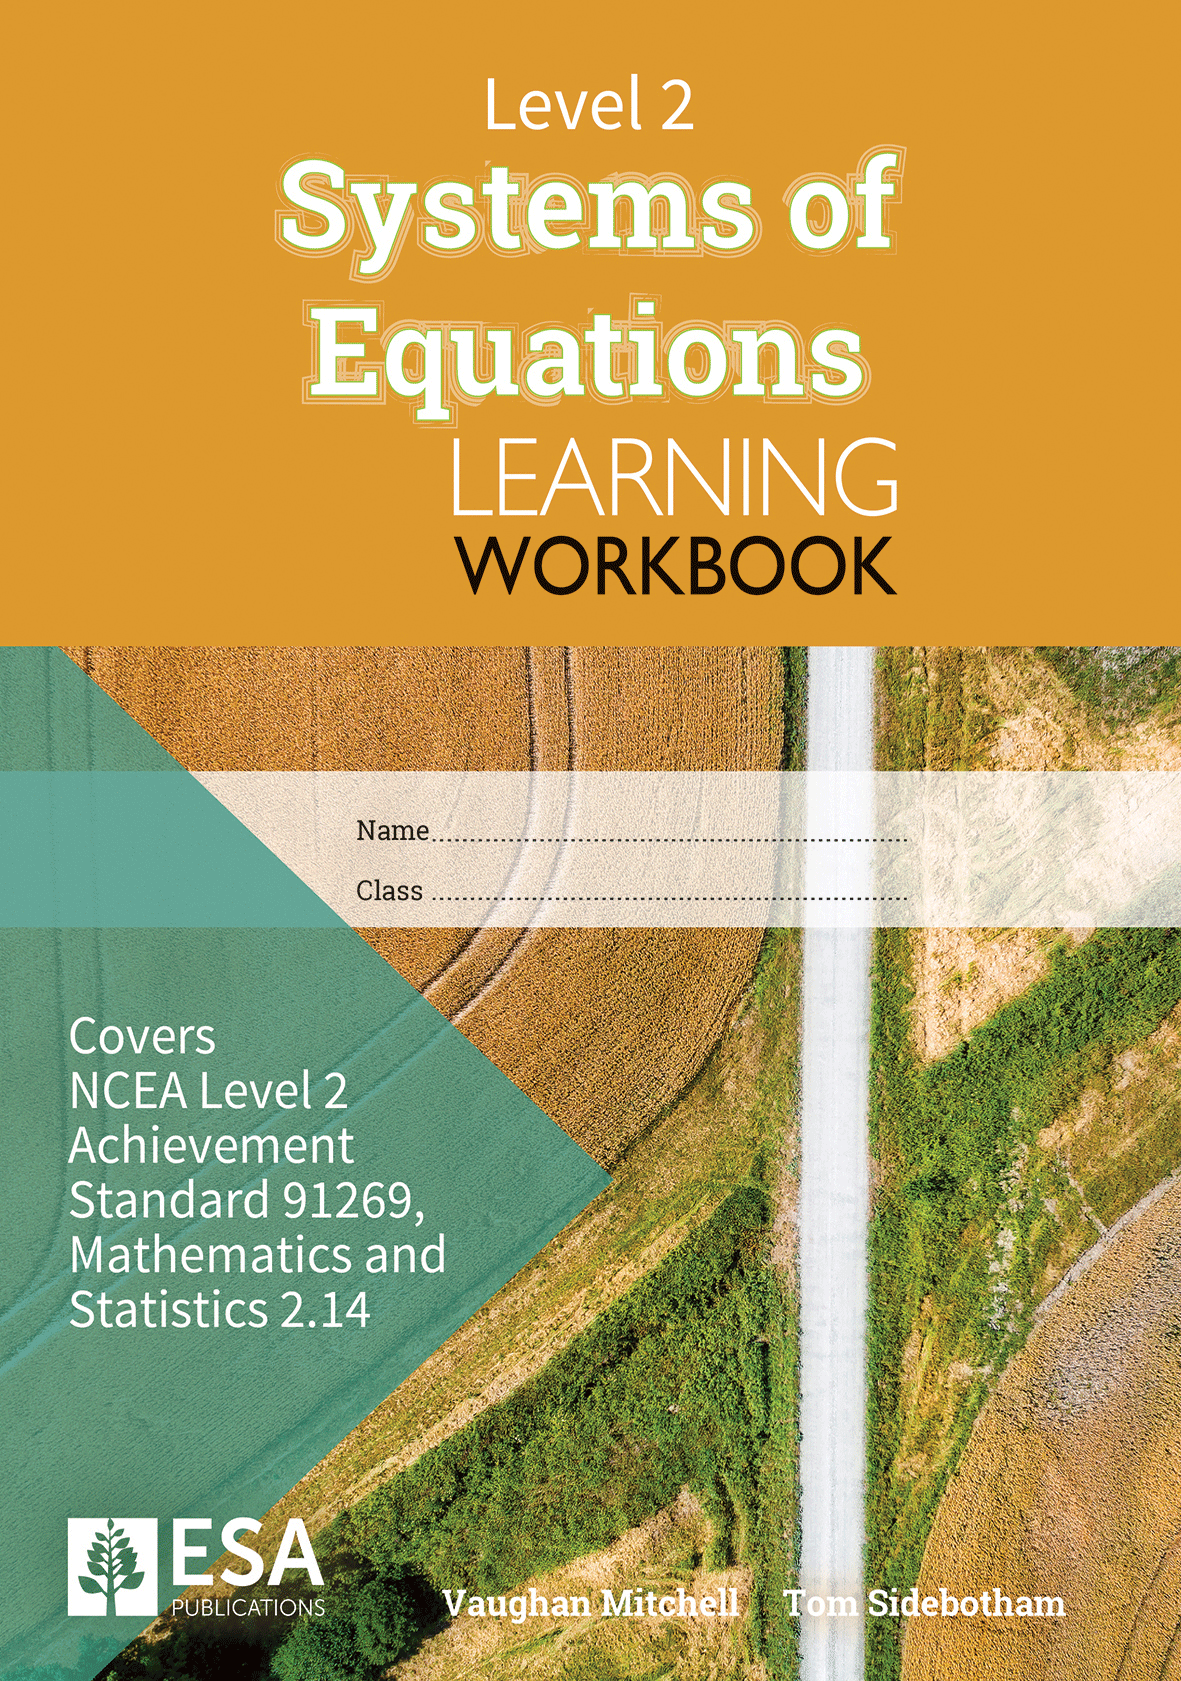 Level 2 Systems of Equations 2.14 Learning Workbook